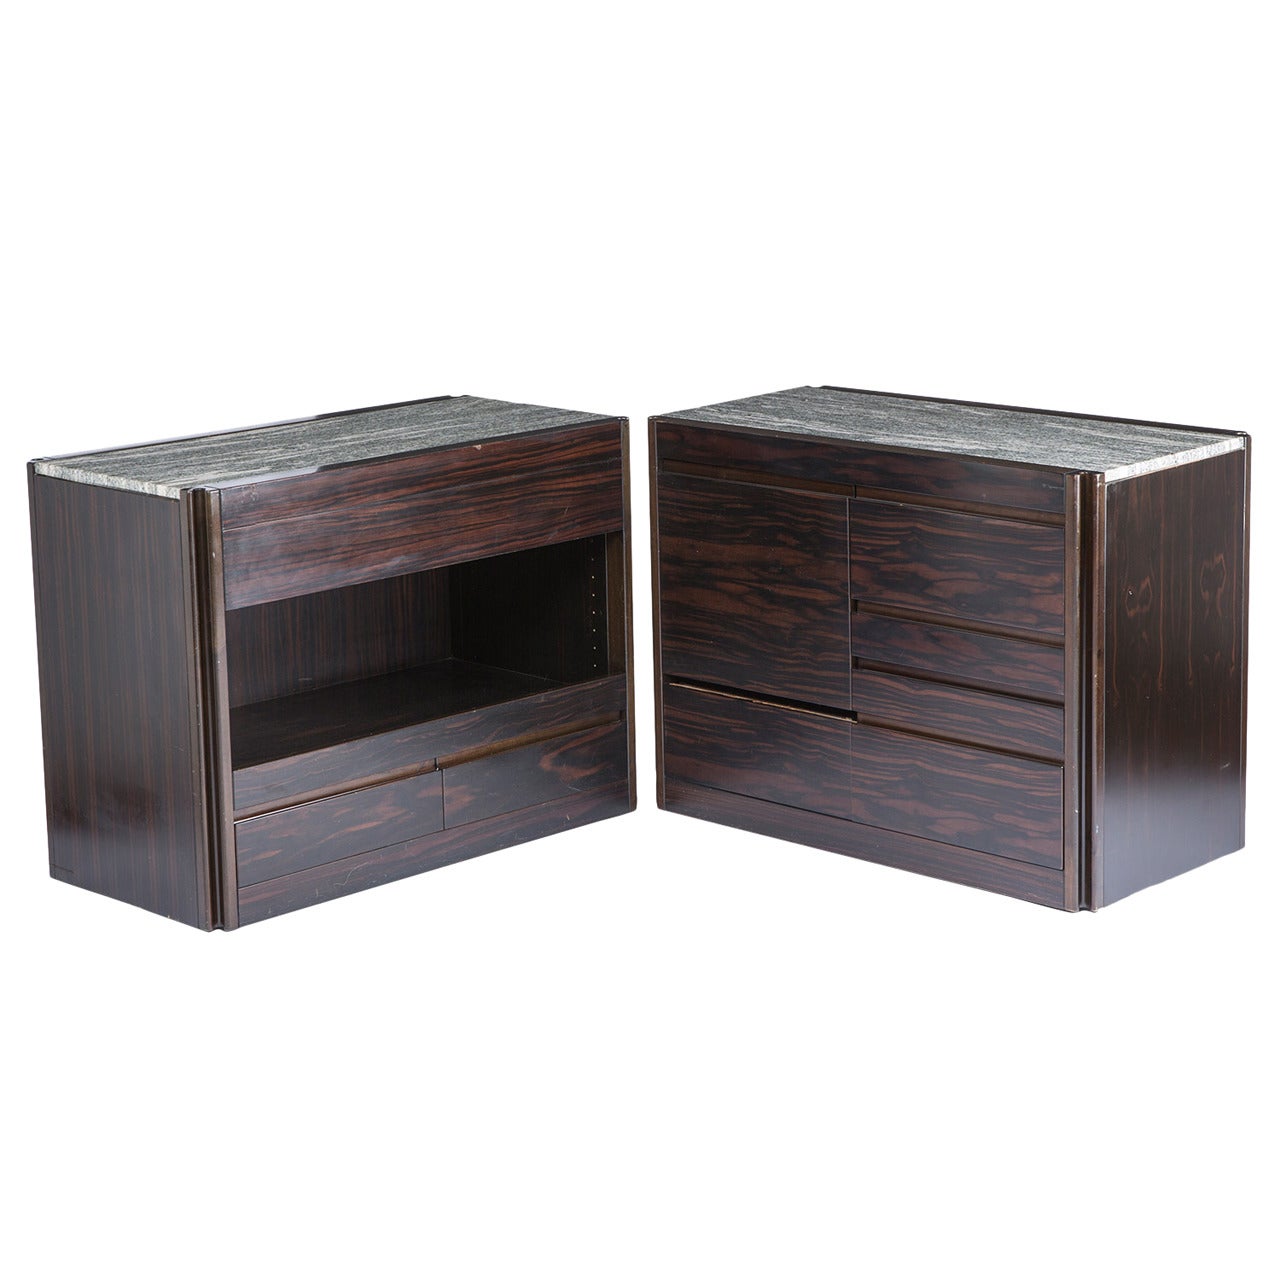 Set of Two "4d" Storage System Units by Mangiarotti for Molteni